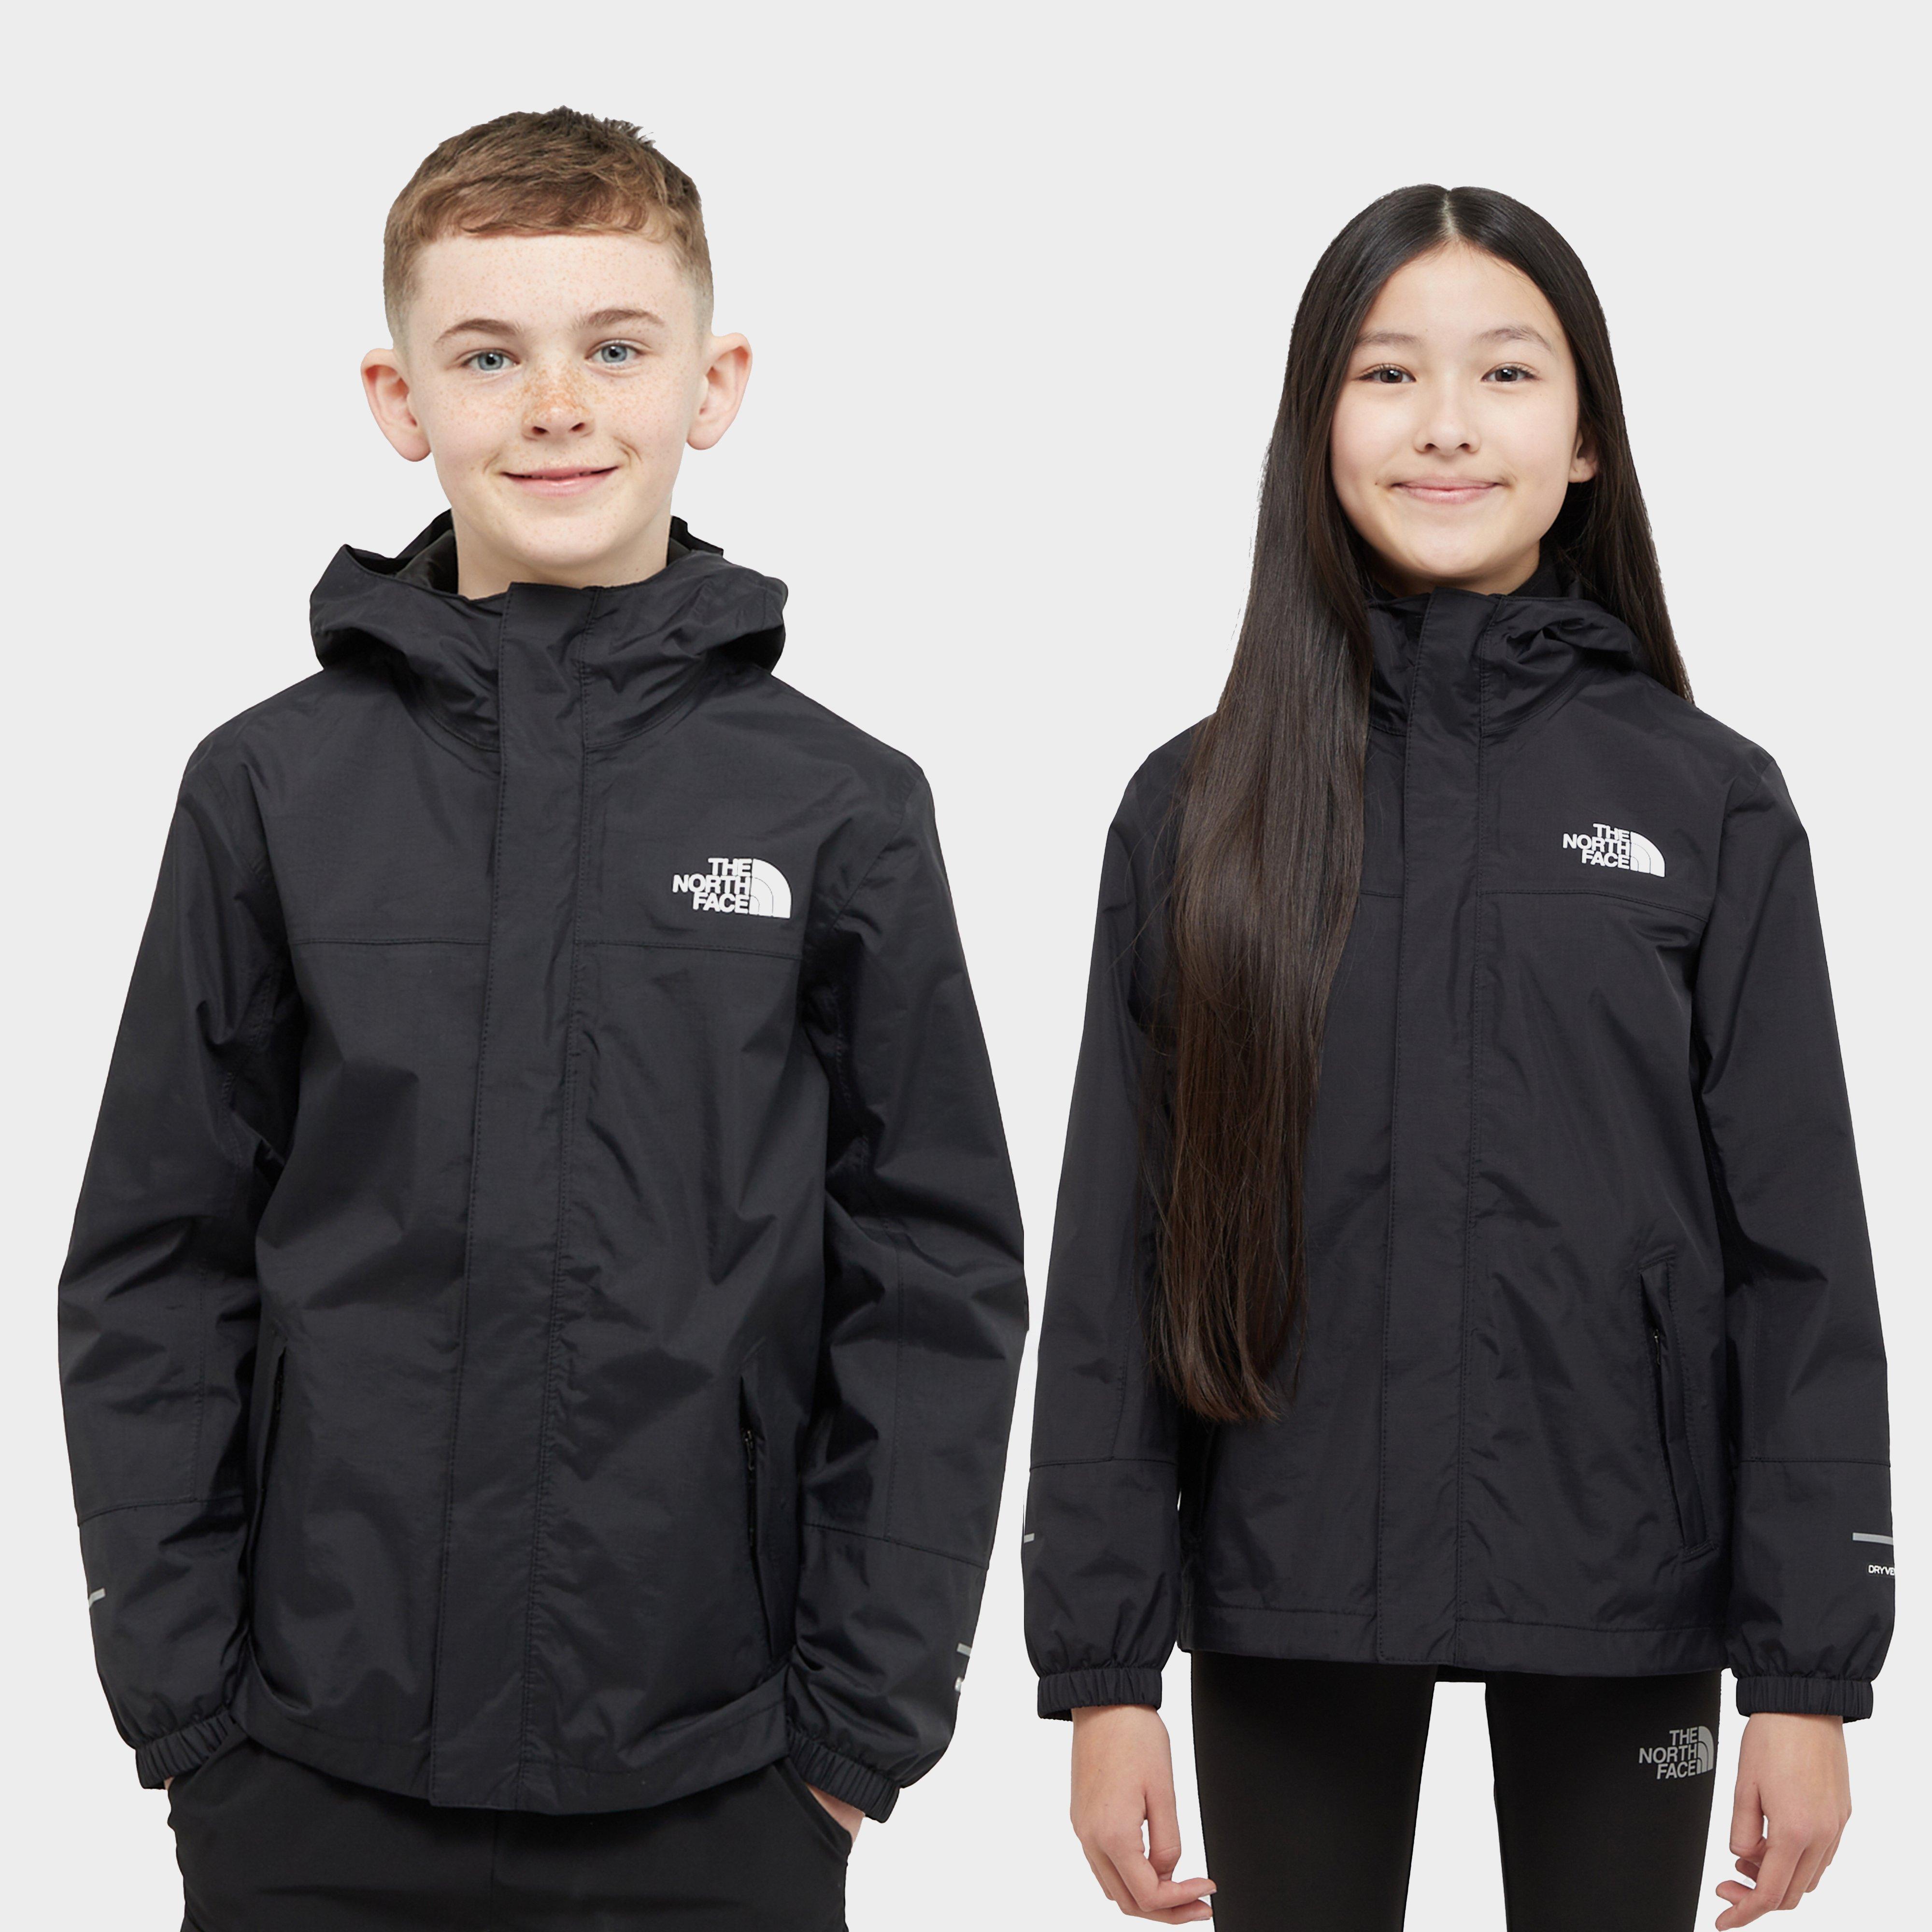  The North Face Kids